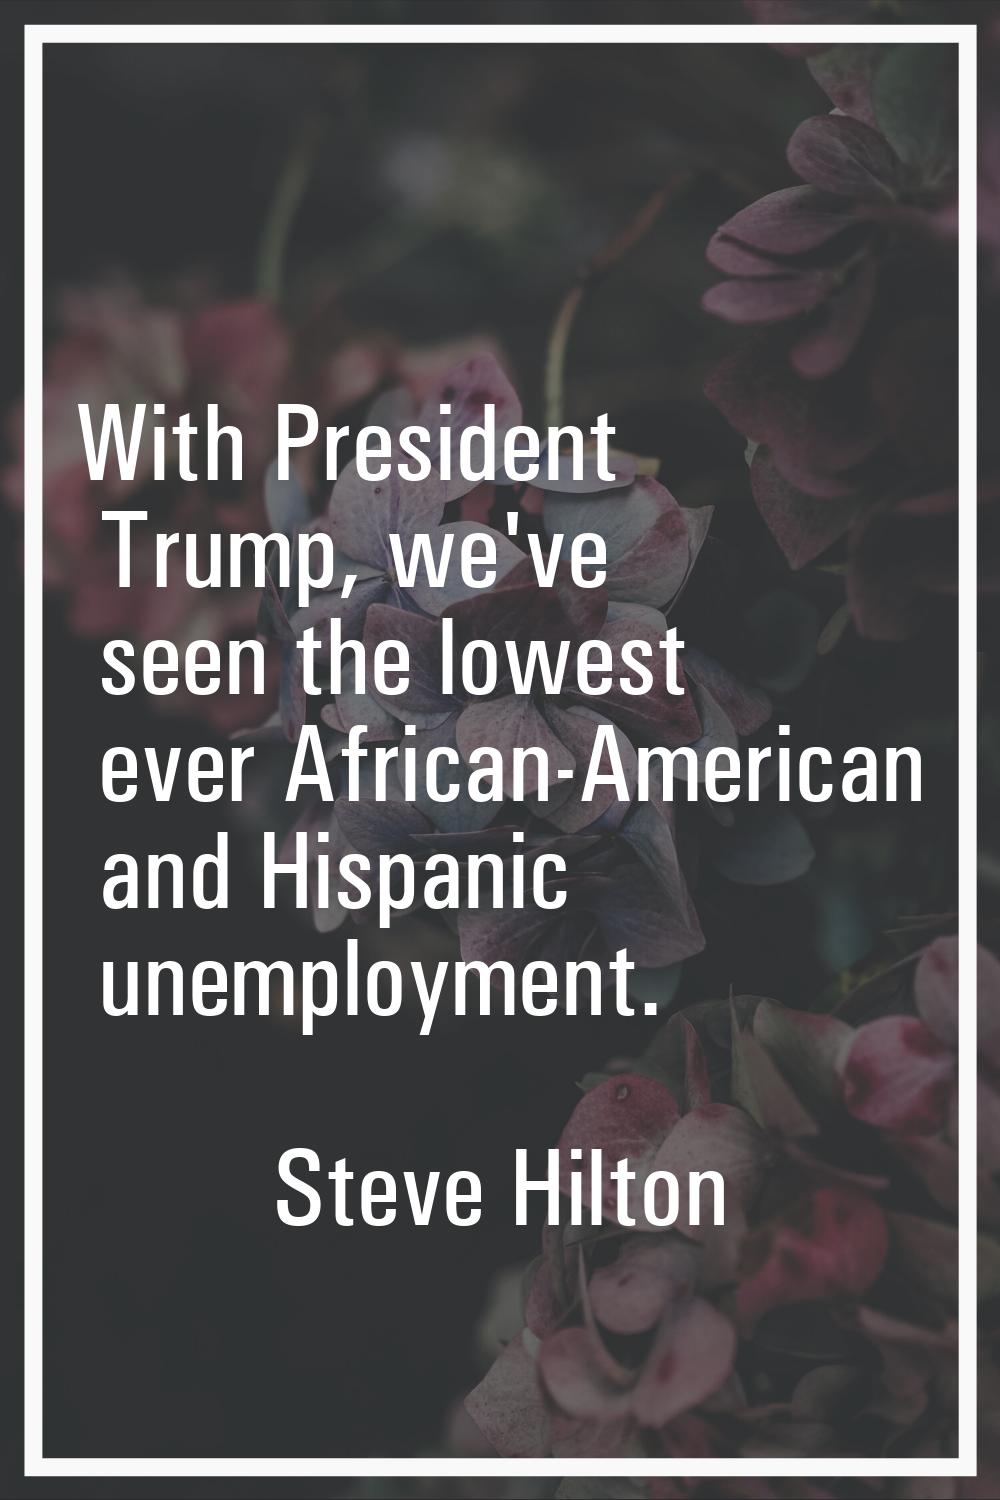 With President Trump, we've seen the lowest ever African-American and Hispanic unemployment.